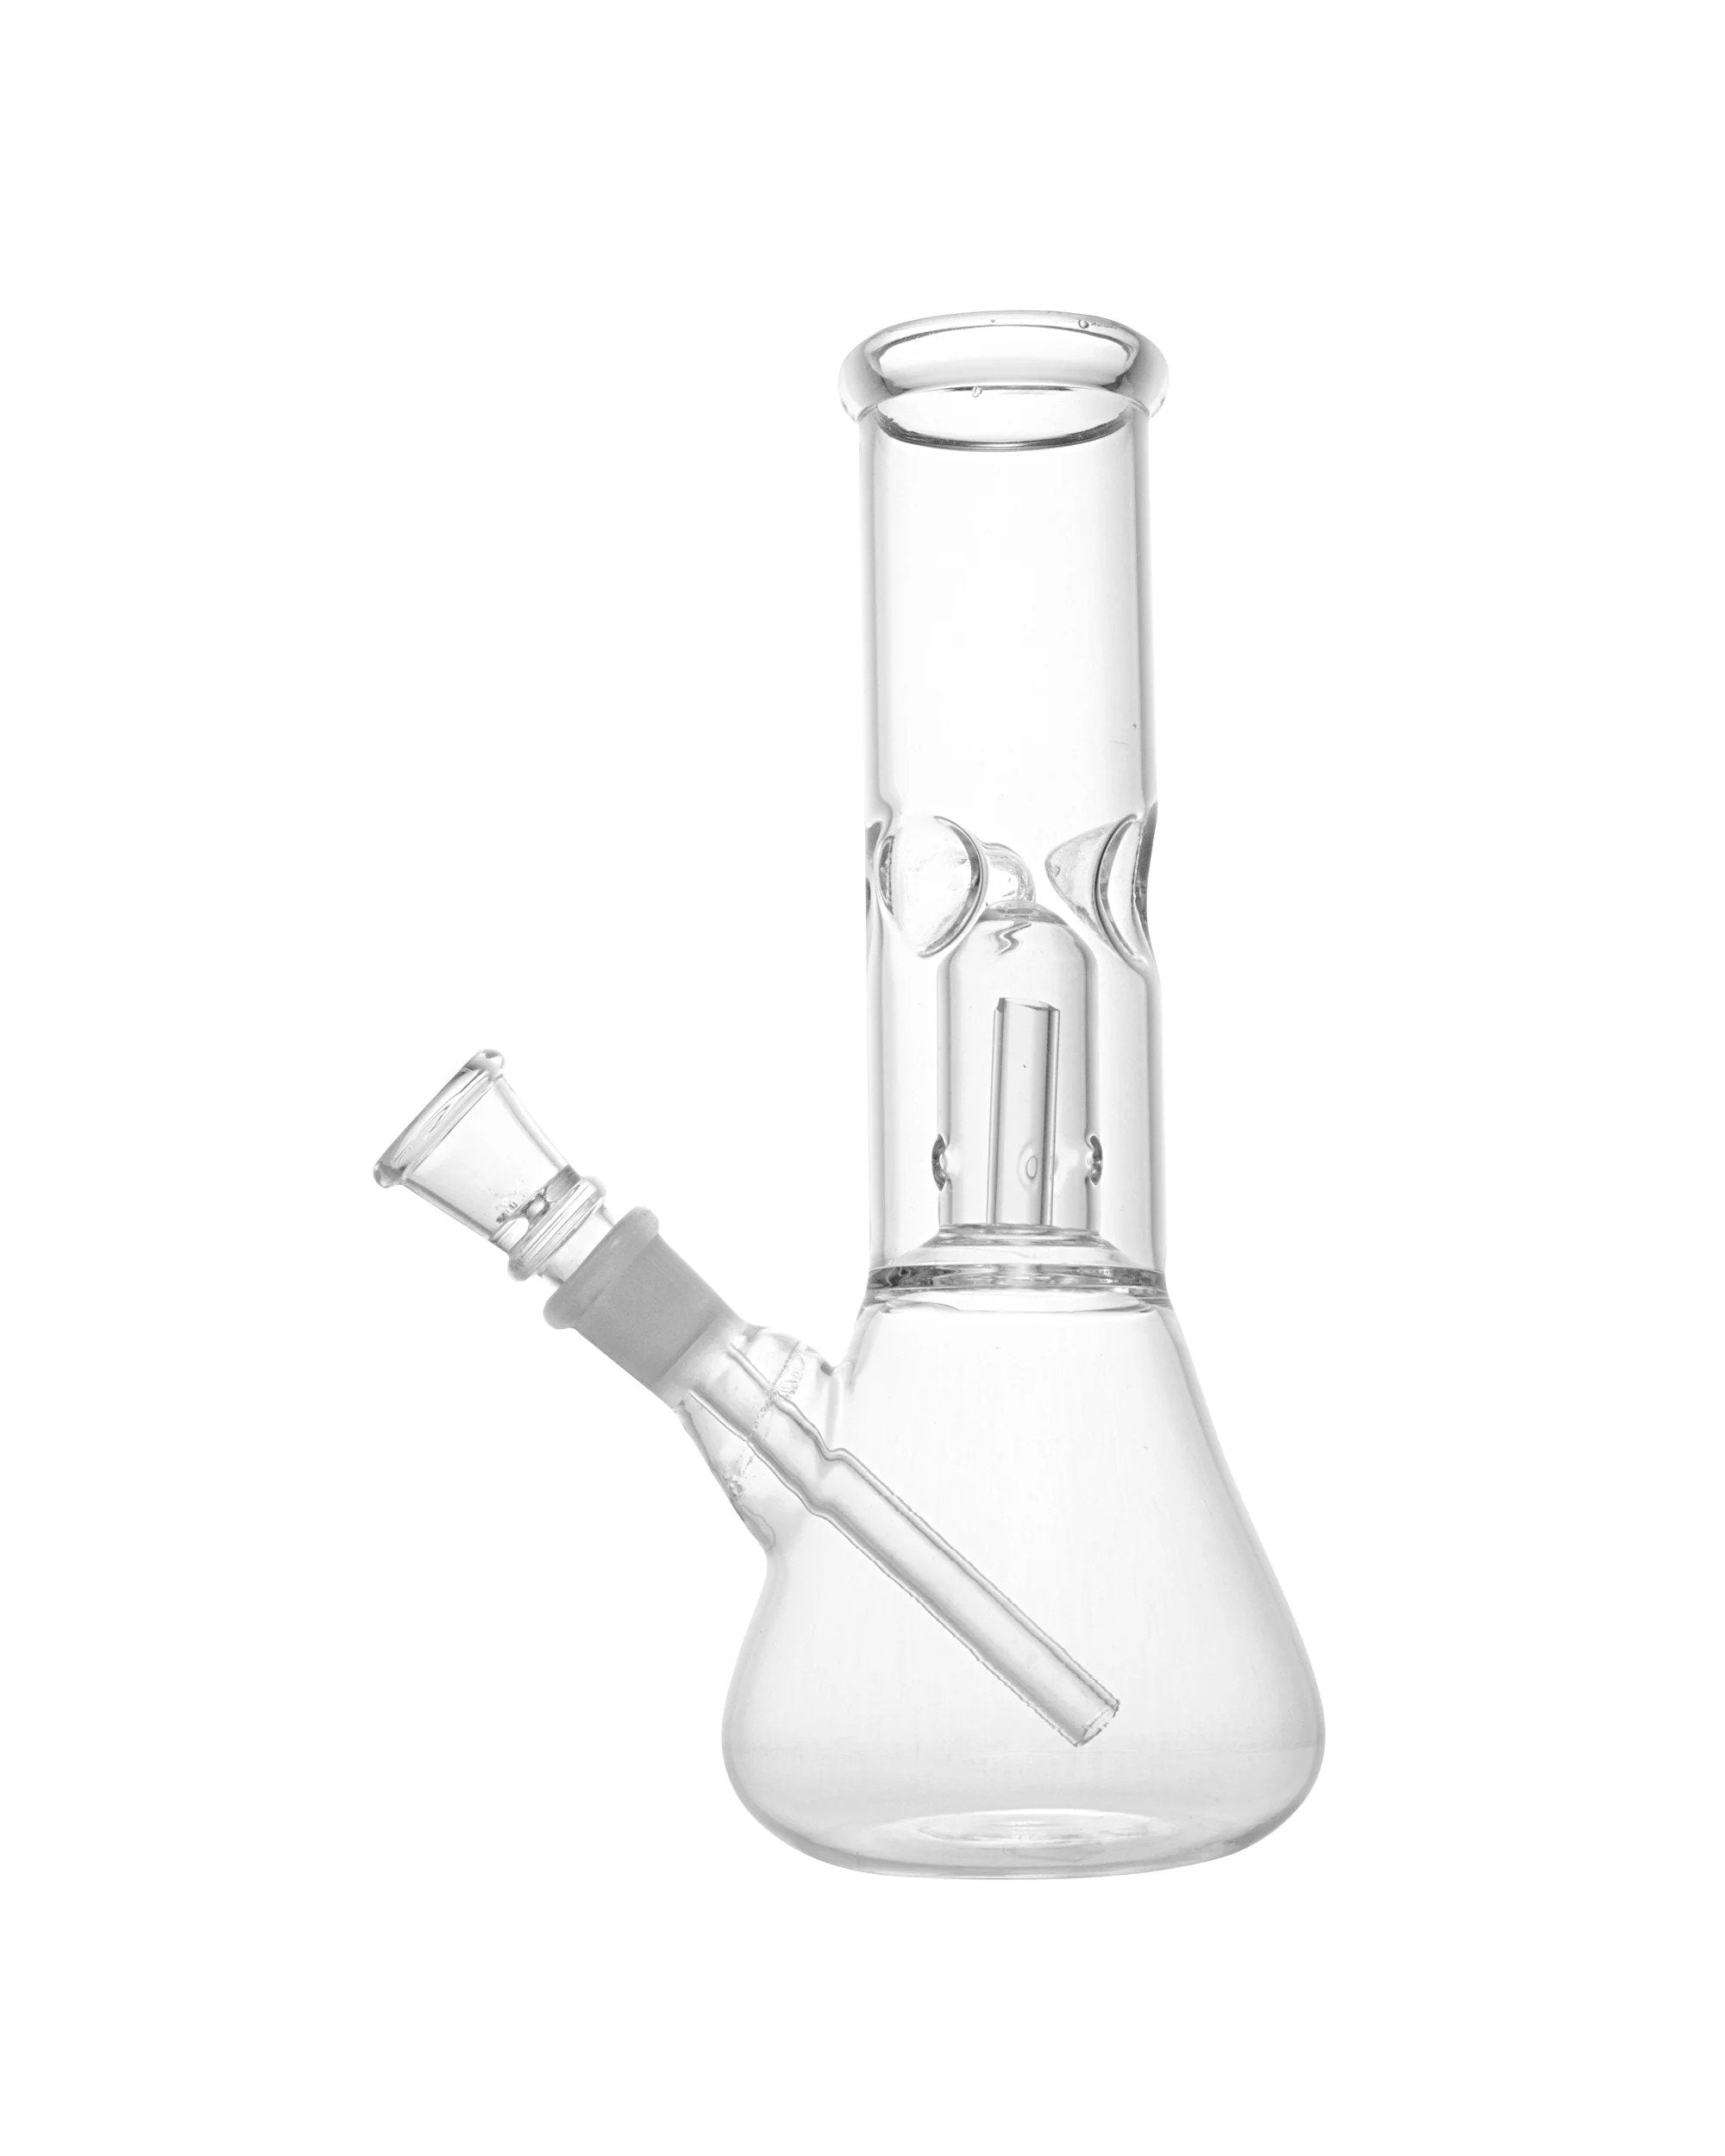 Wholesale 8 Inch Glass Bong Accessory Matrix Percolators With Clear Hookahs  And Color Edge Water Pipe From Smoking_glass, $34.36